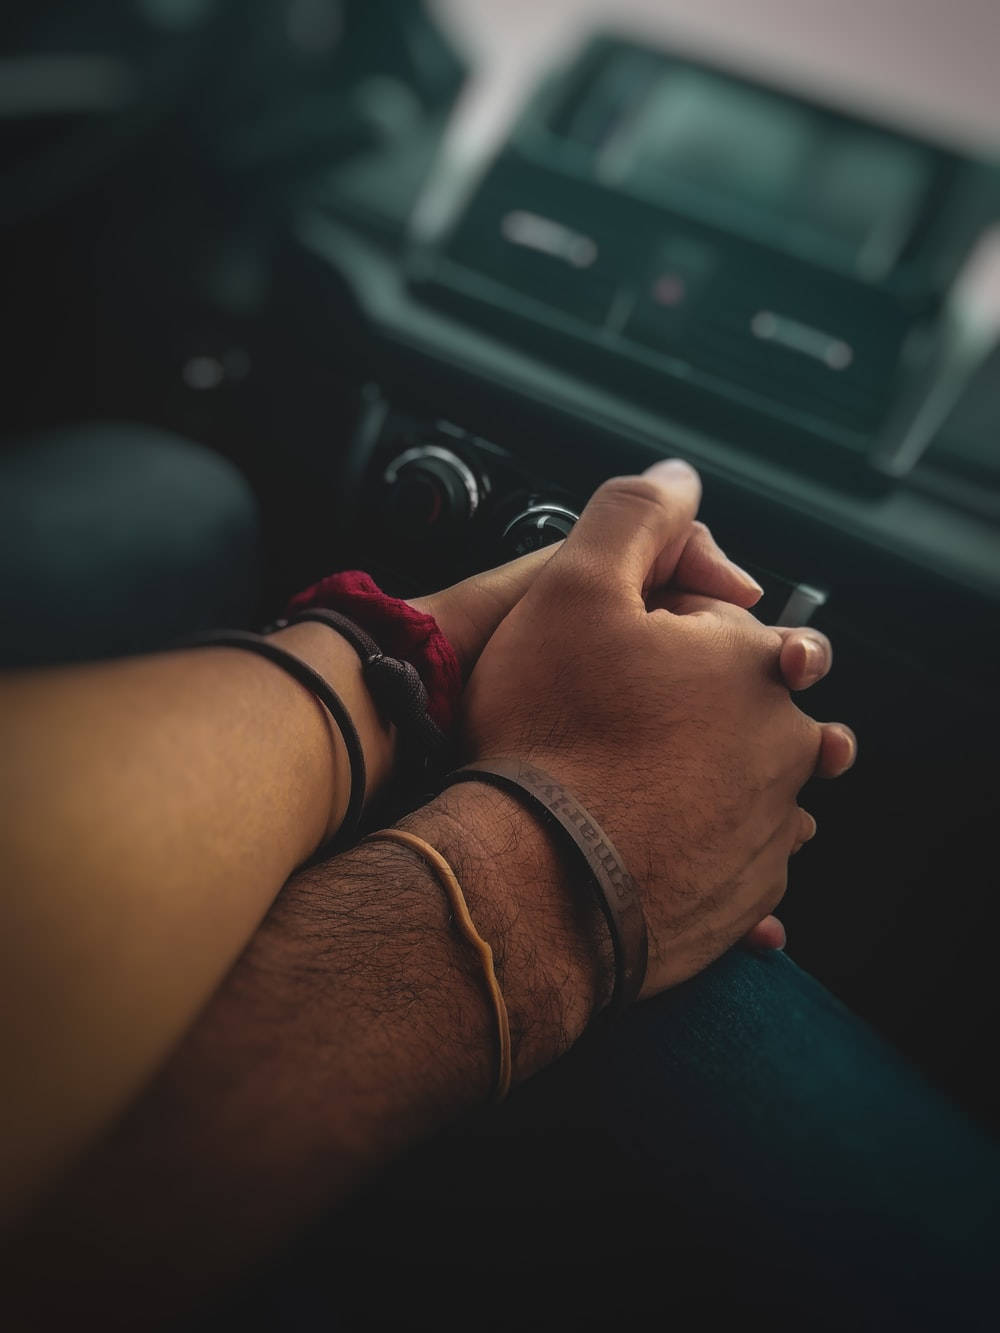 Hand In Hand In A Car Wallpaper